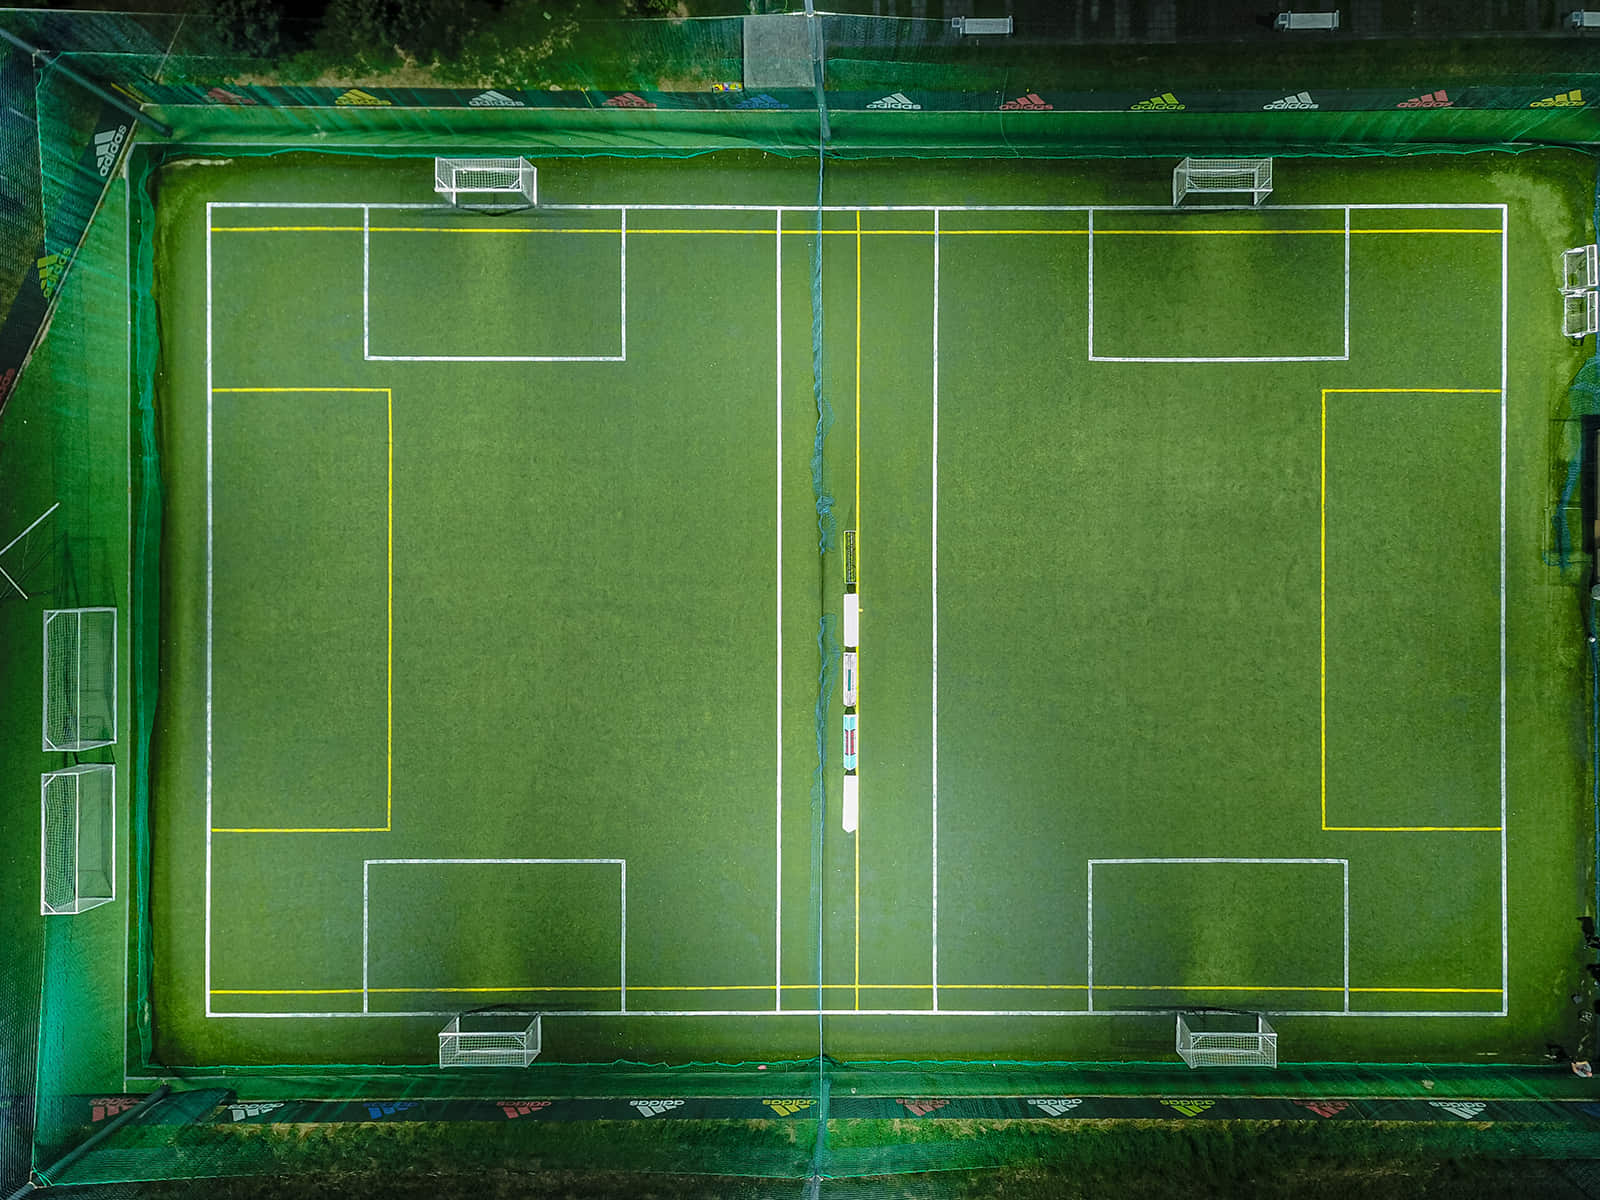 Small Middle Size Football Field